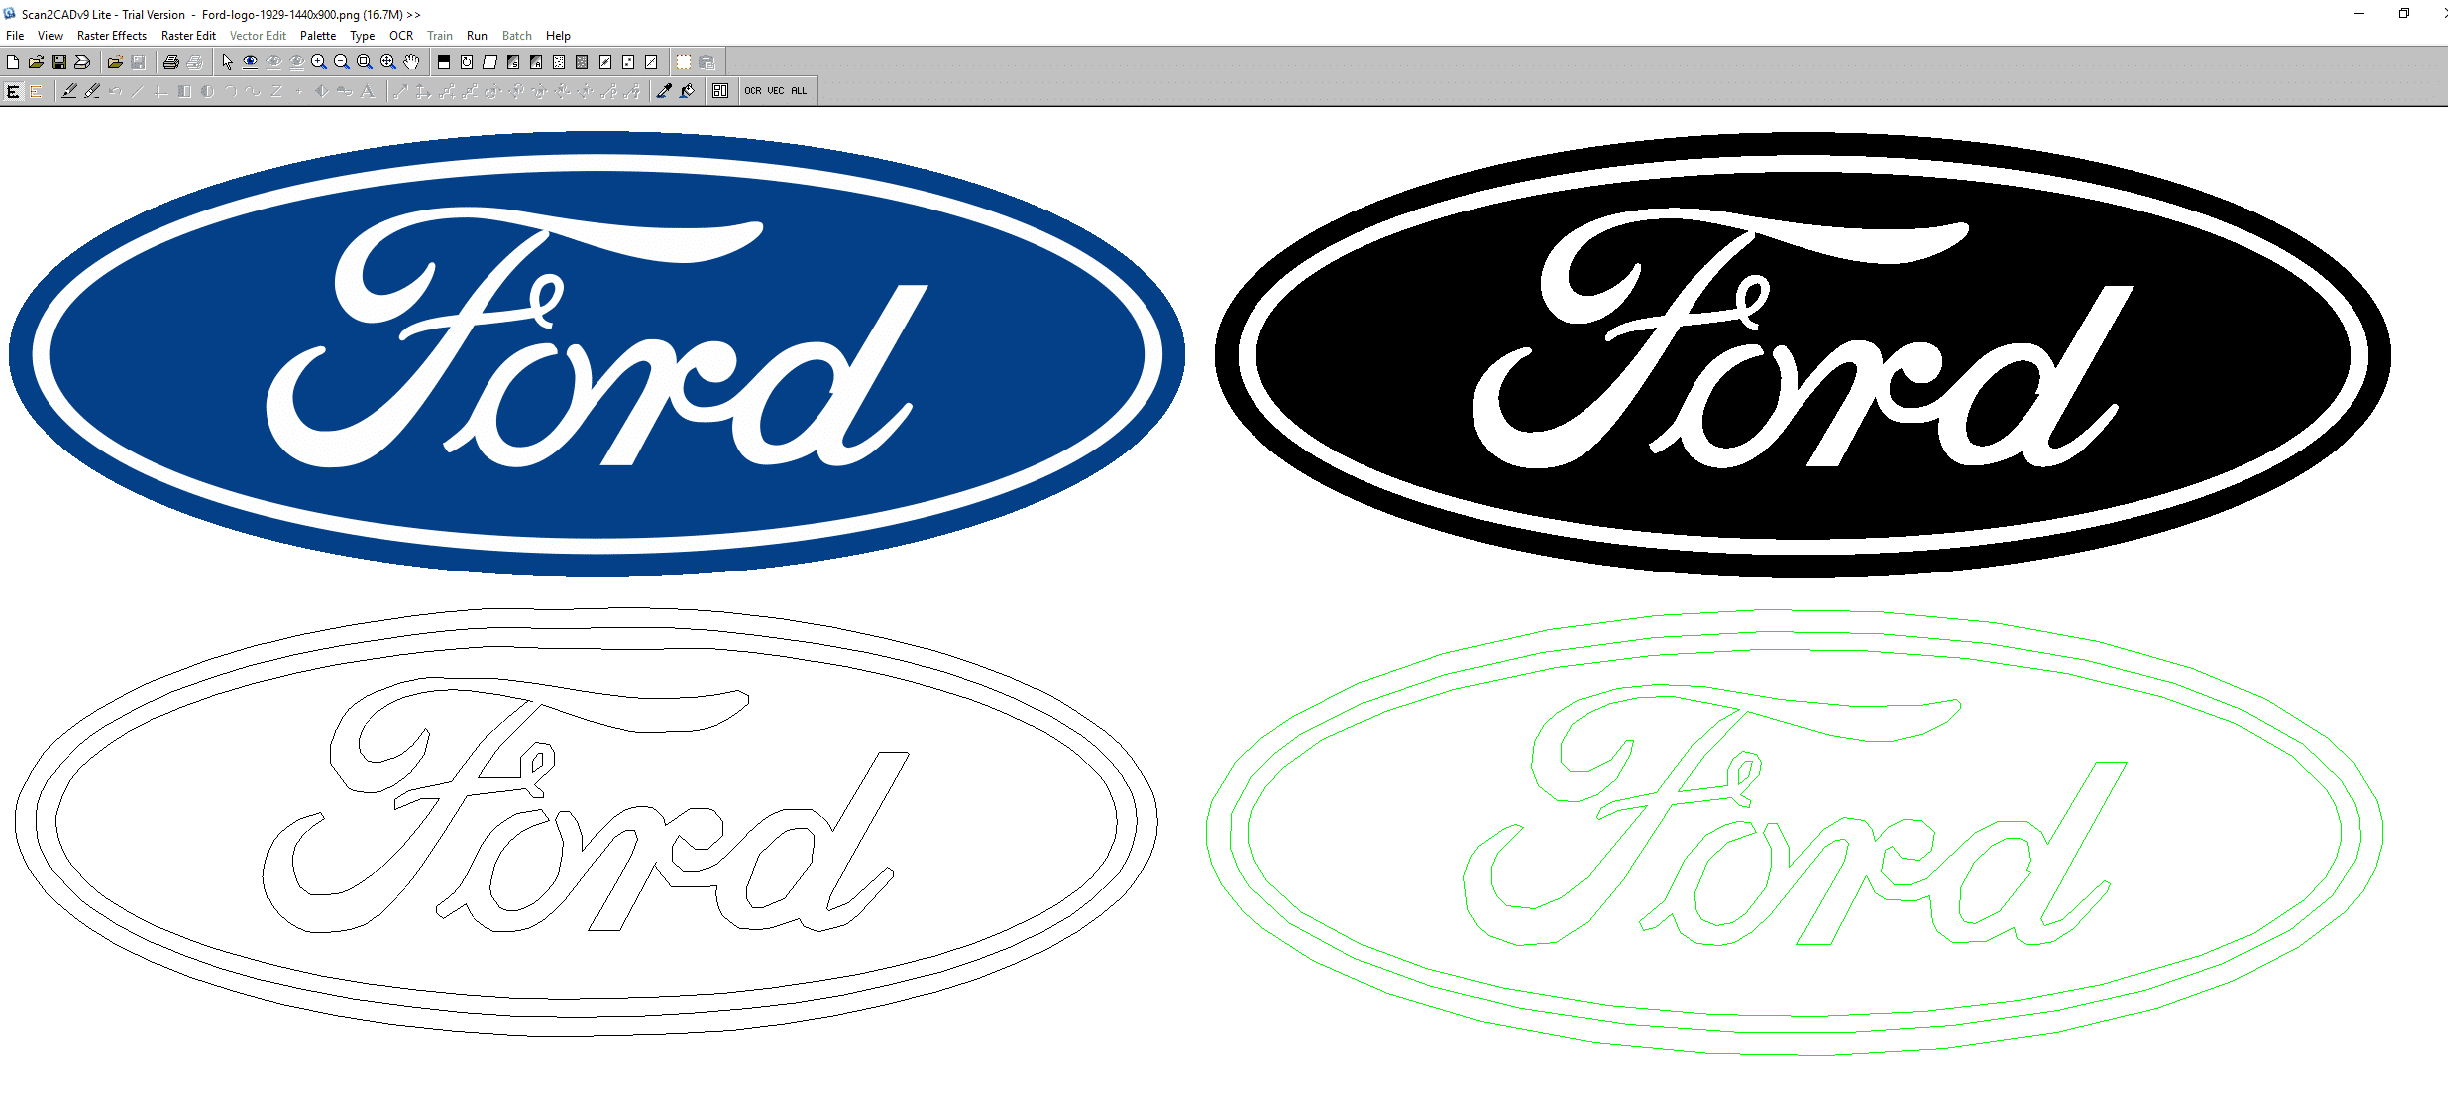 Vectorization process for the Ford logo